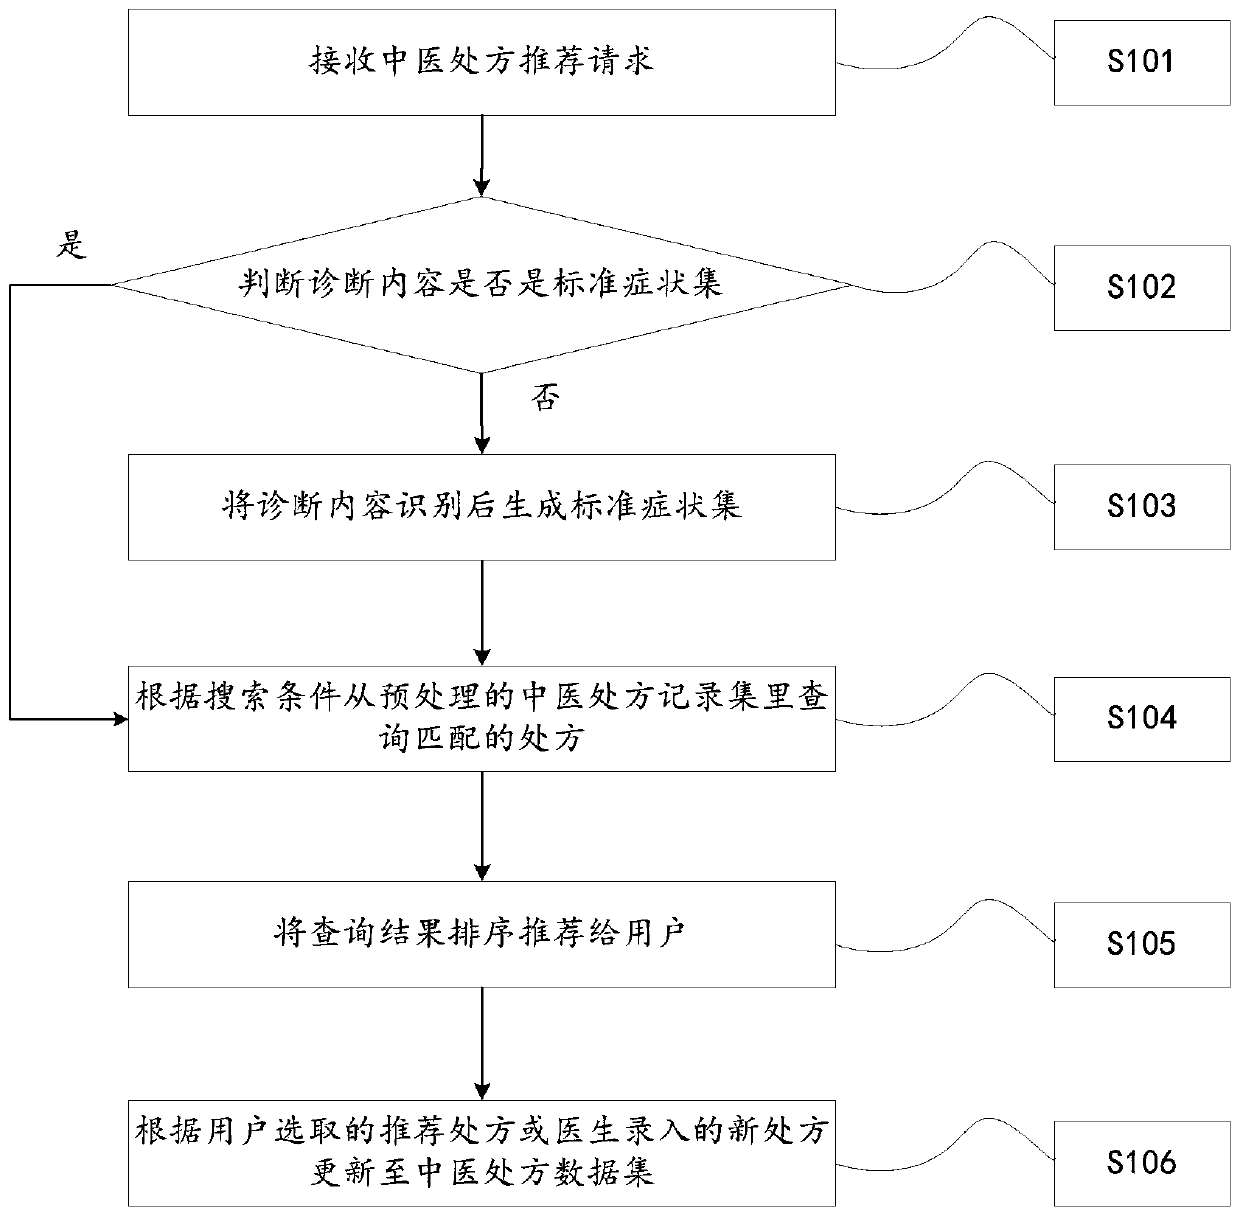 Traditional Chinese medicine prescription recommendation sorting method based on data matching